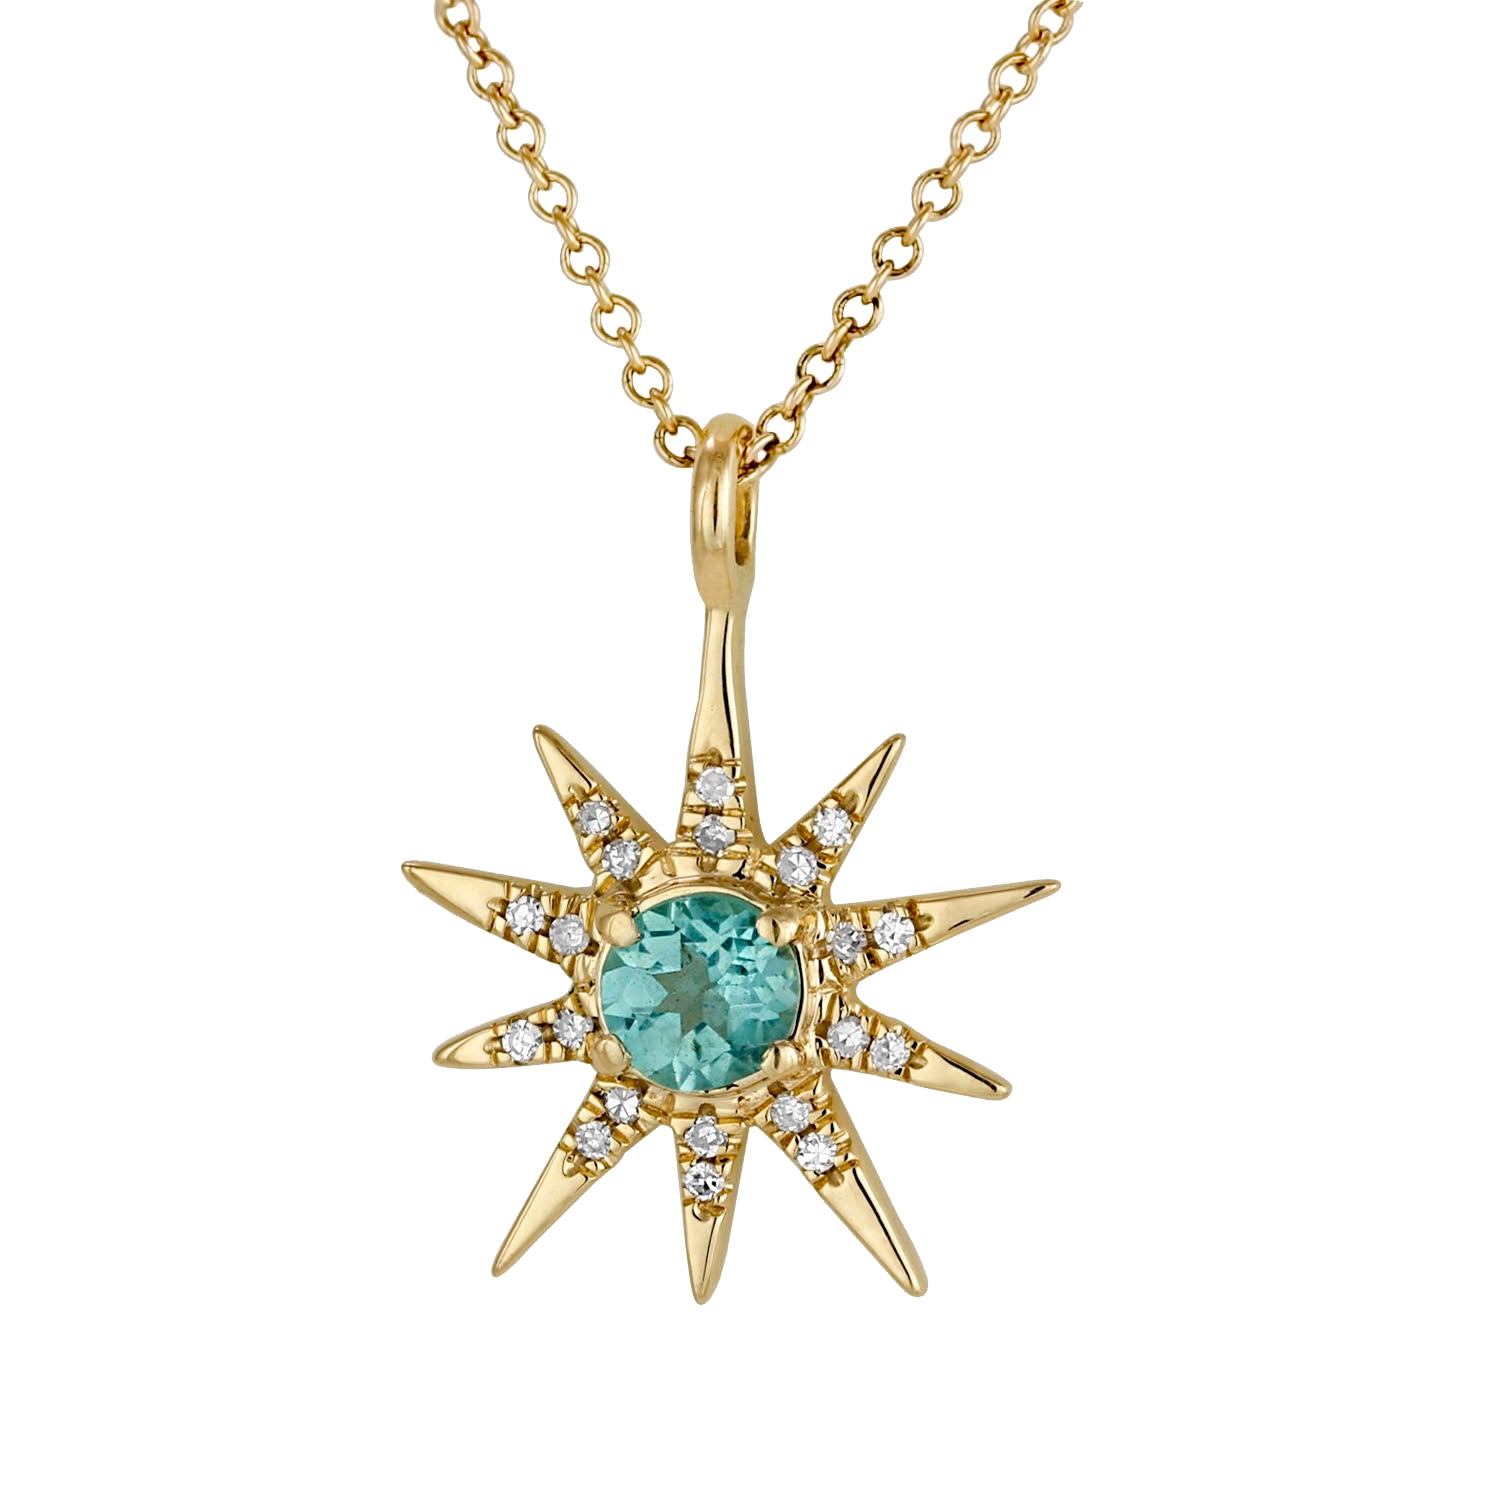 Apatite Star Necklace With Diamonds in 14K Gold